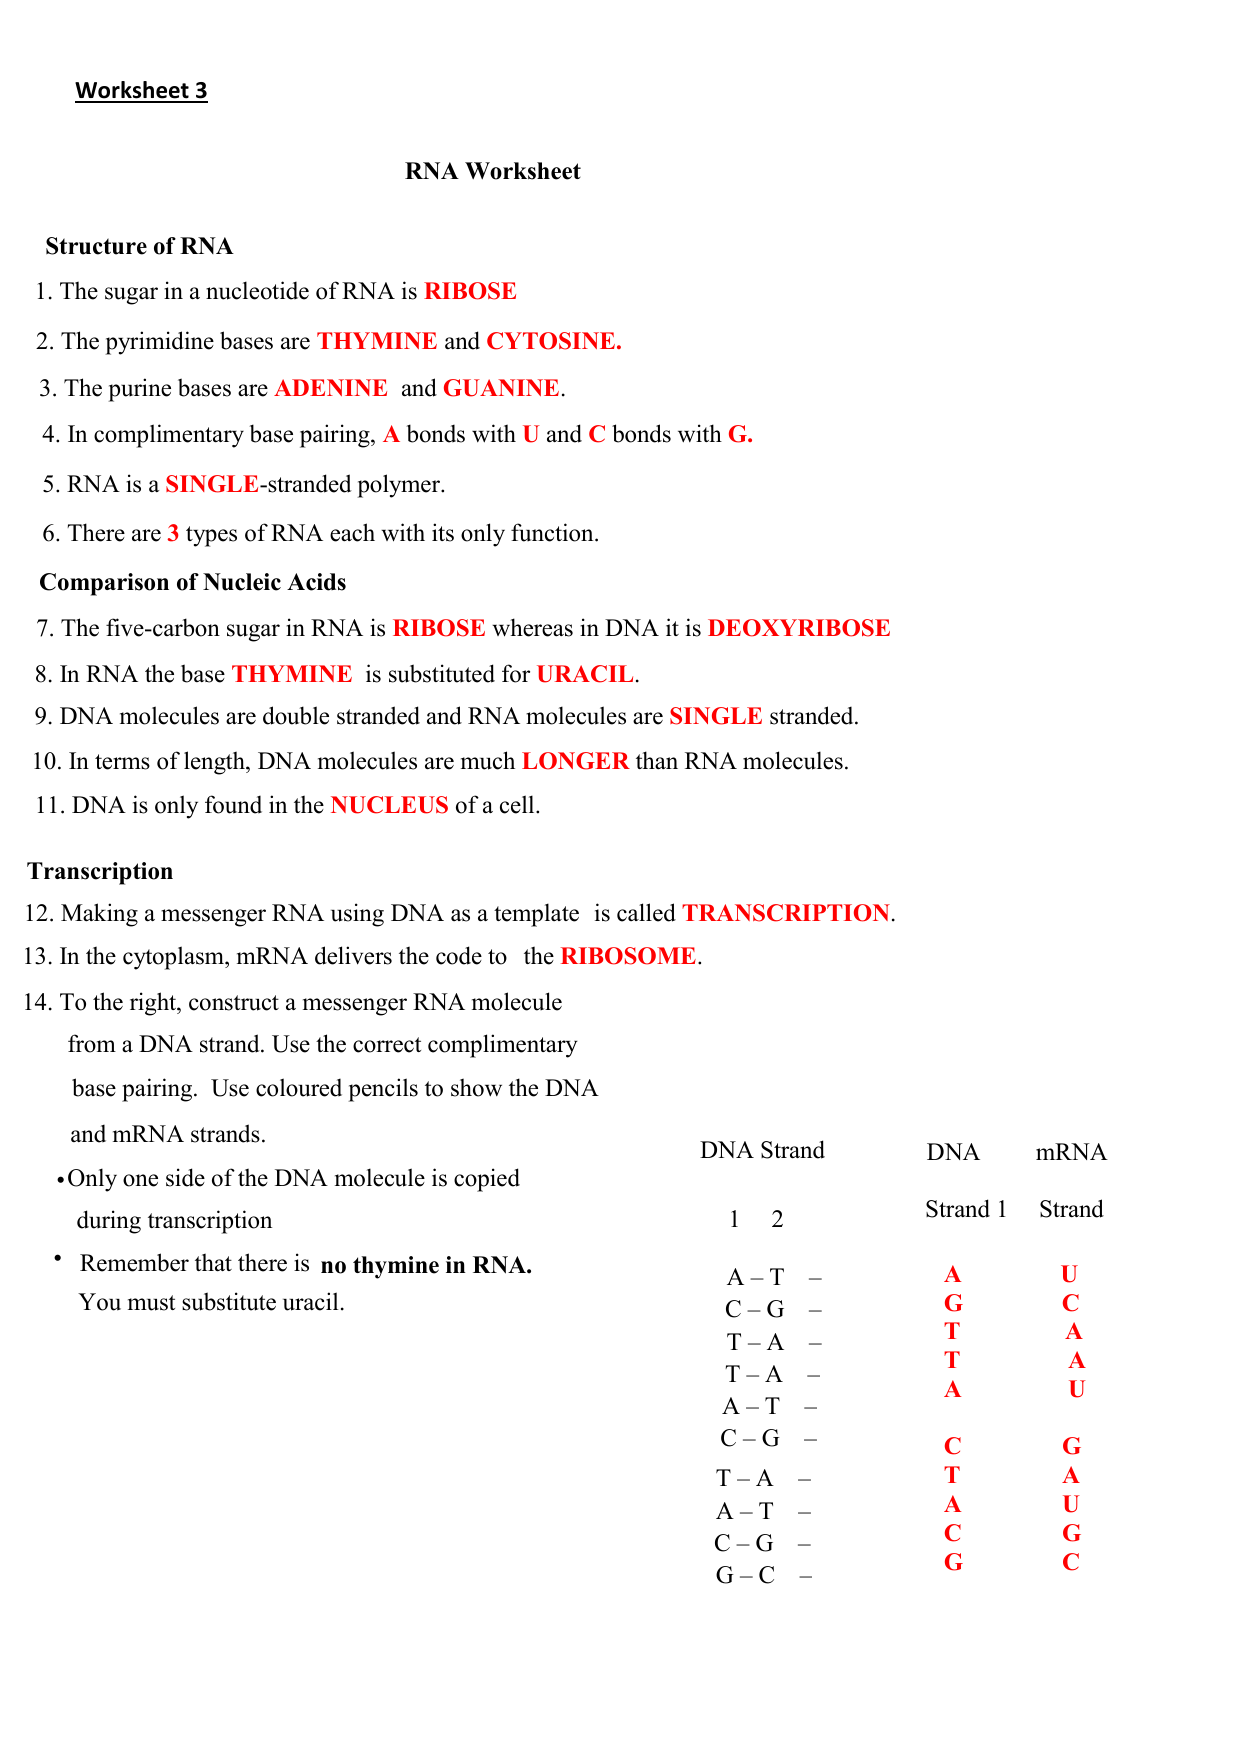 Worksheet 20 - The NSA at Work For Nucleic Acid Worksheet Answers